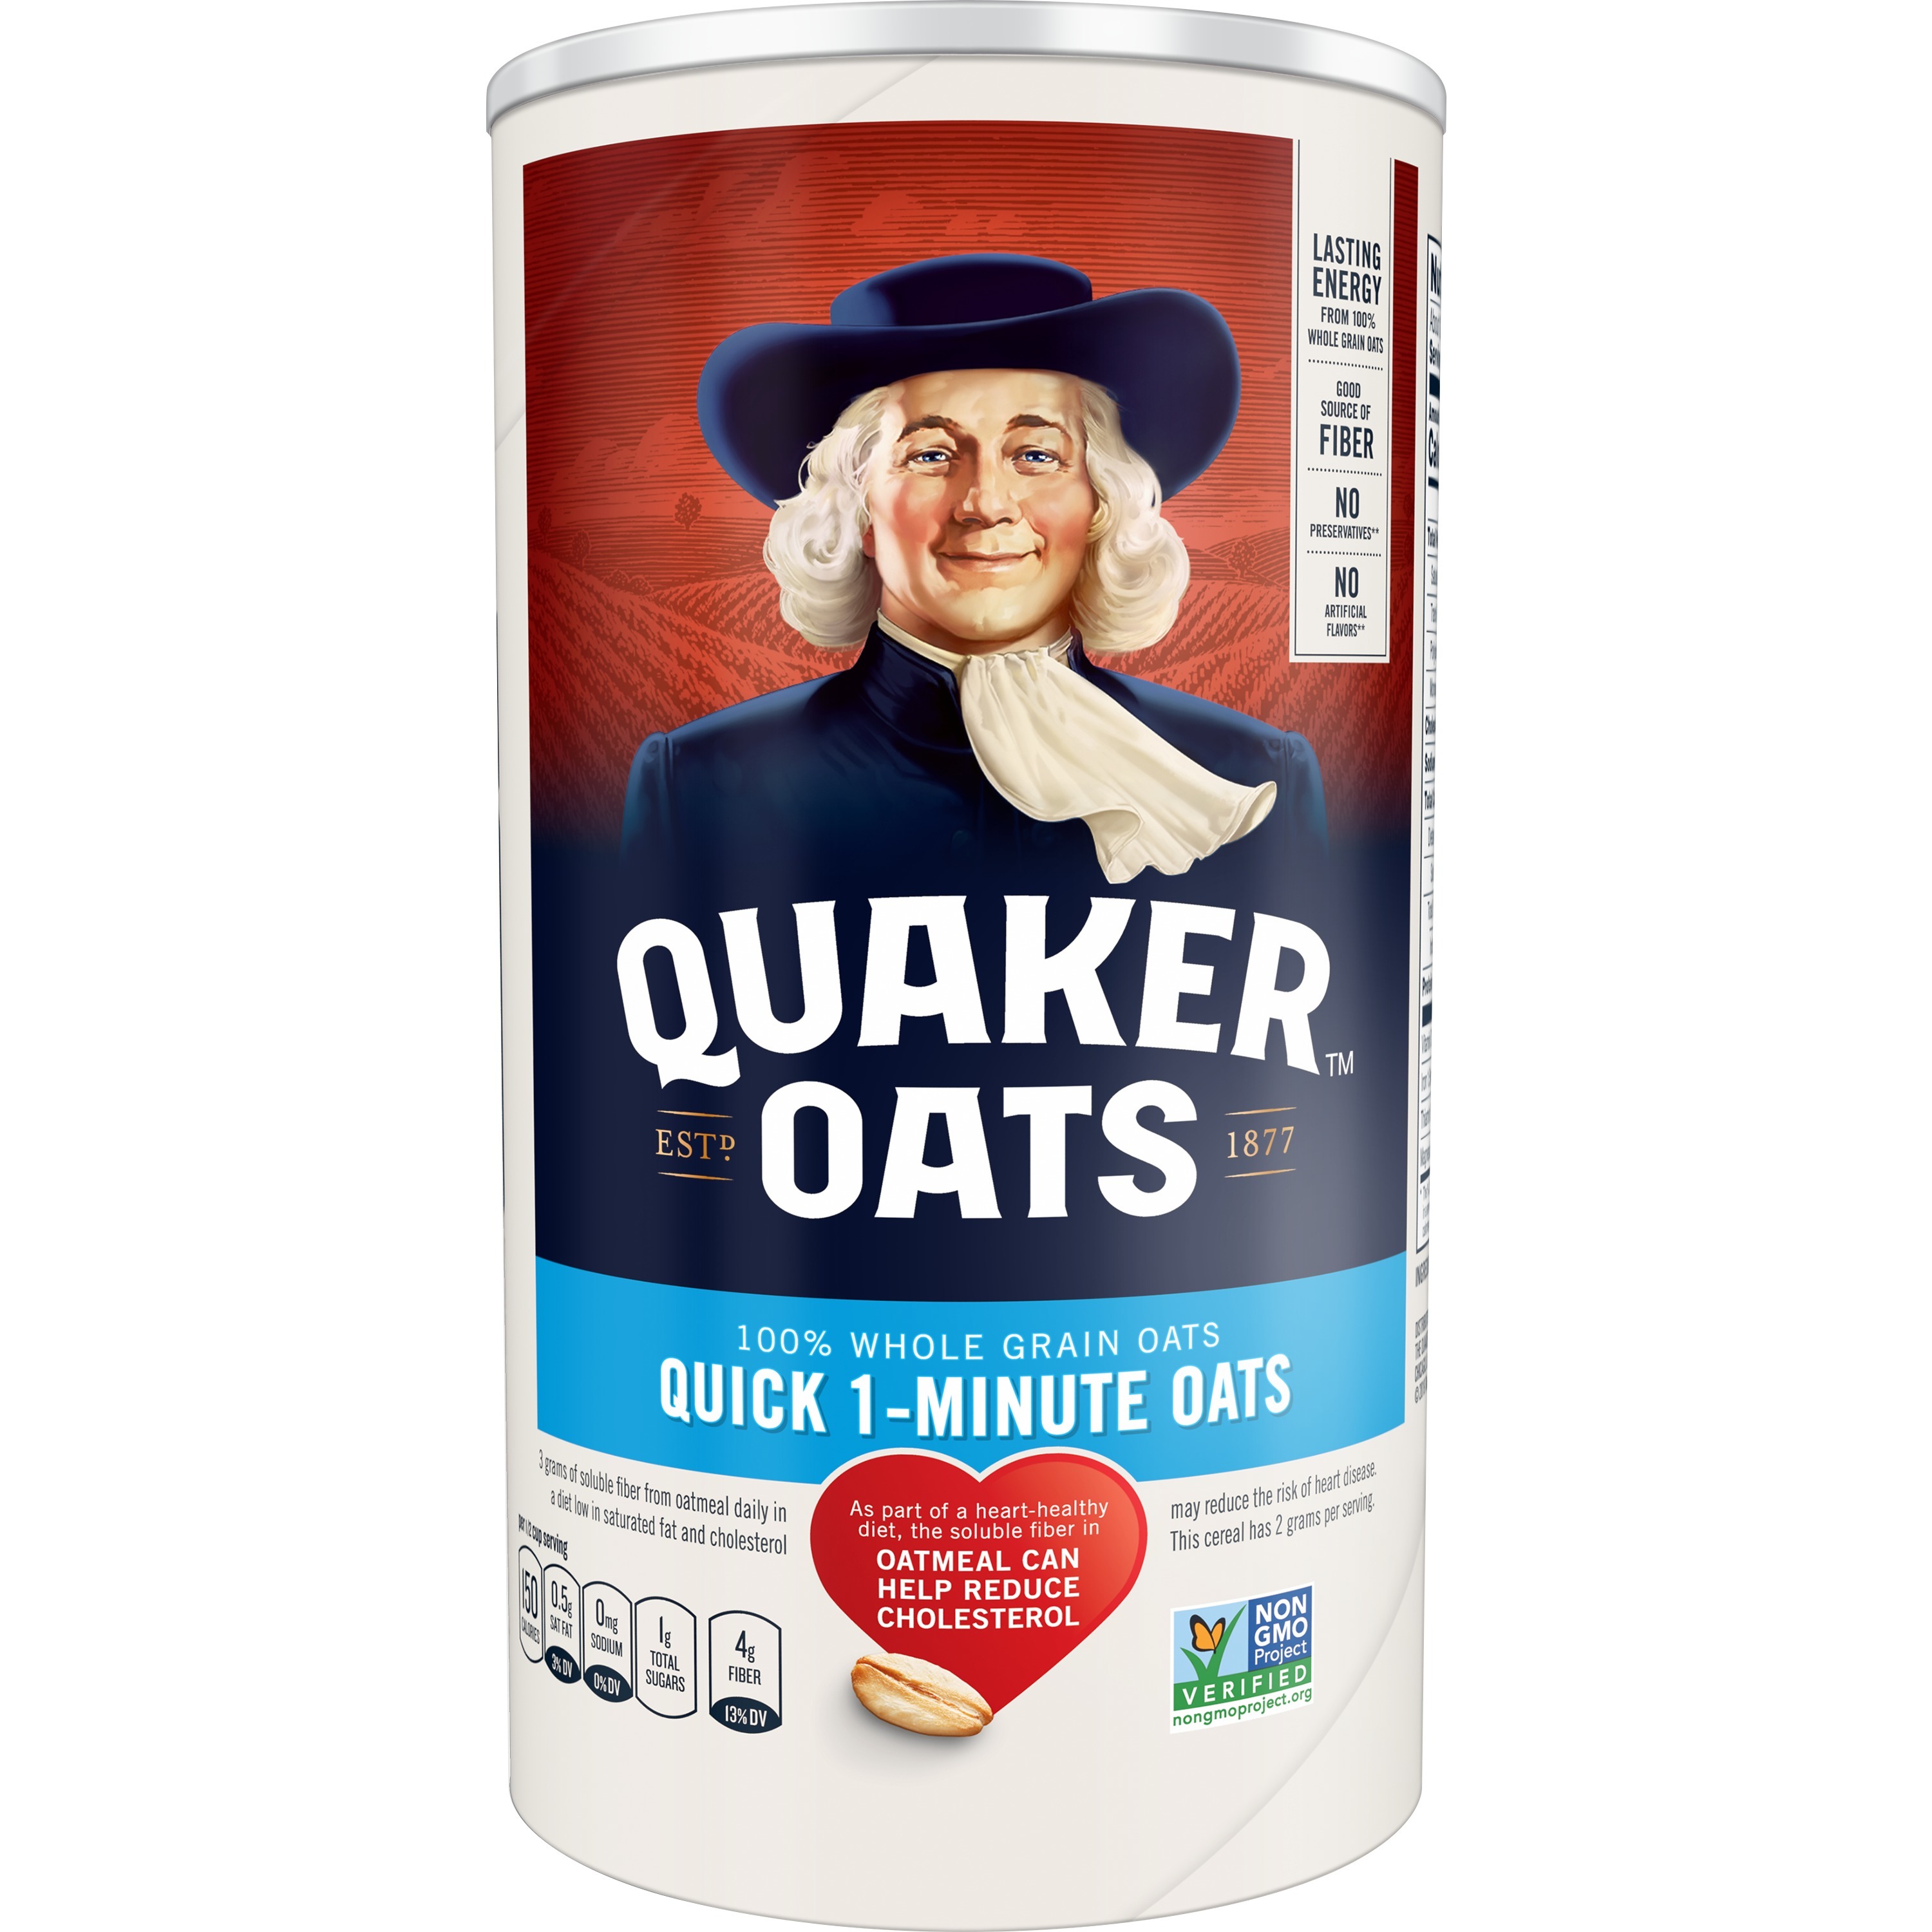 Quaker Whole Grain Oats, Quick Cook 1-Minute Oats, 18 oz Canister - image 3 of 9